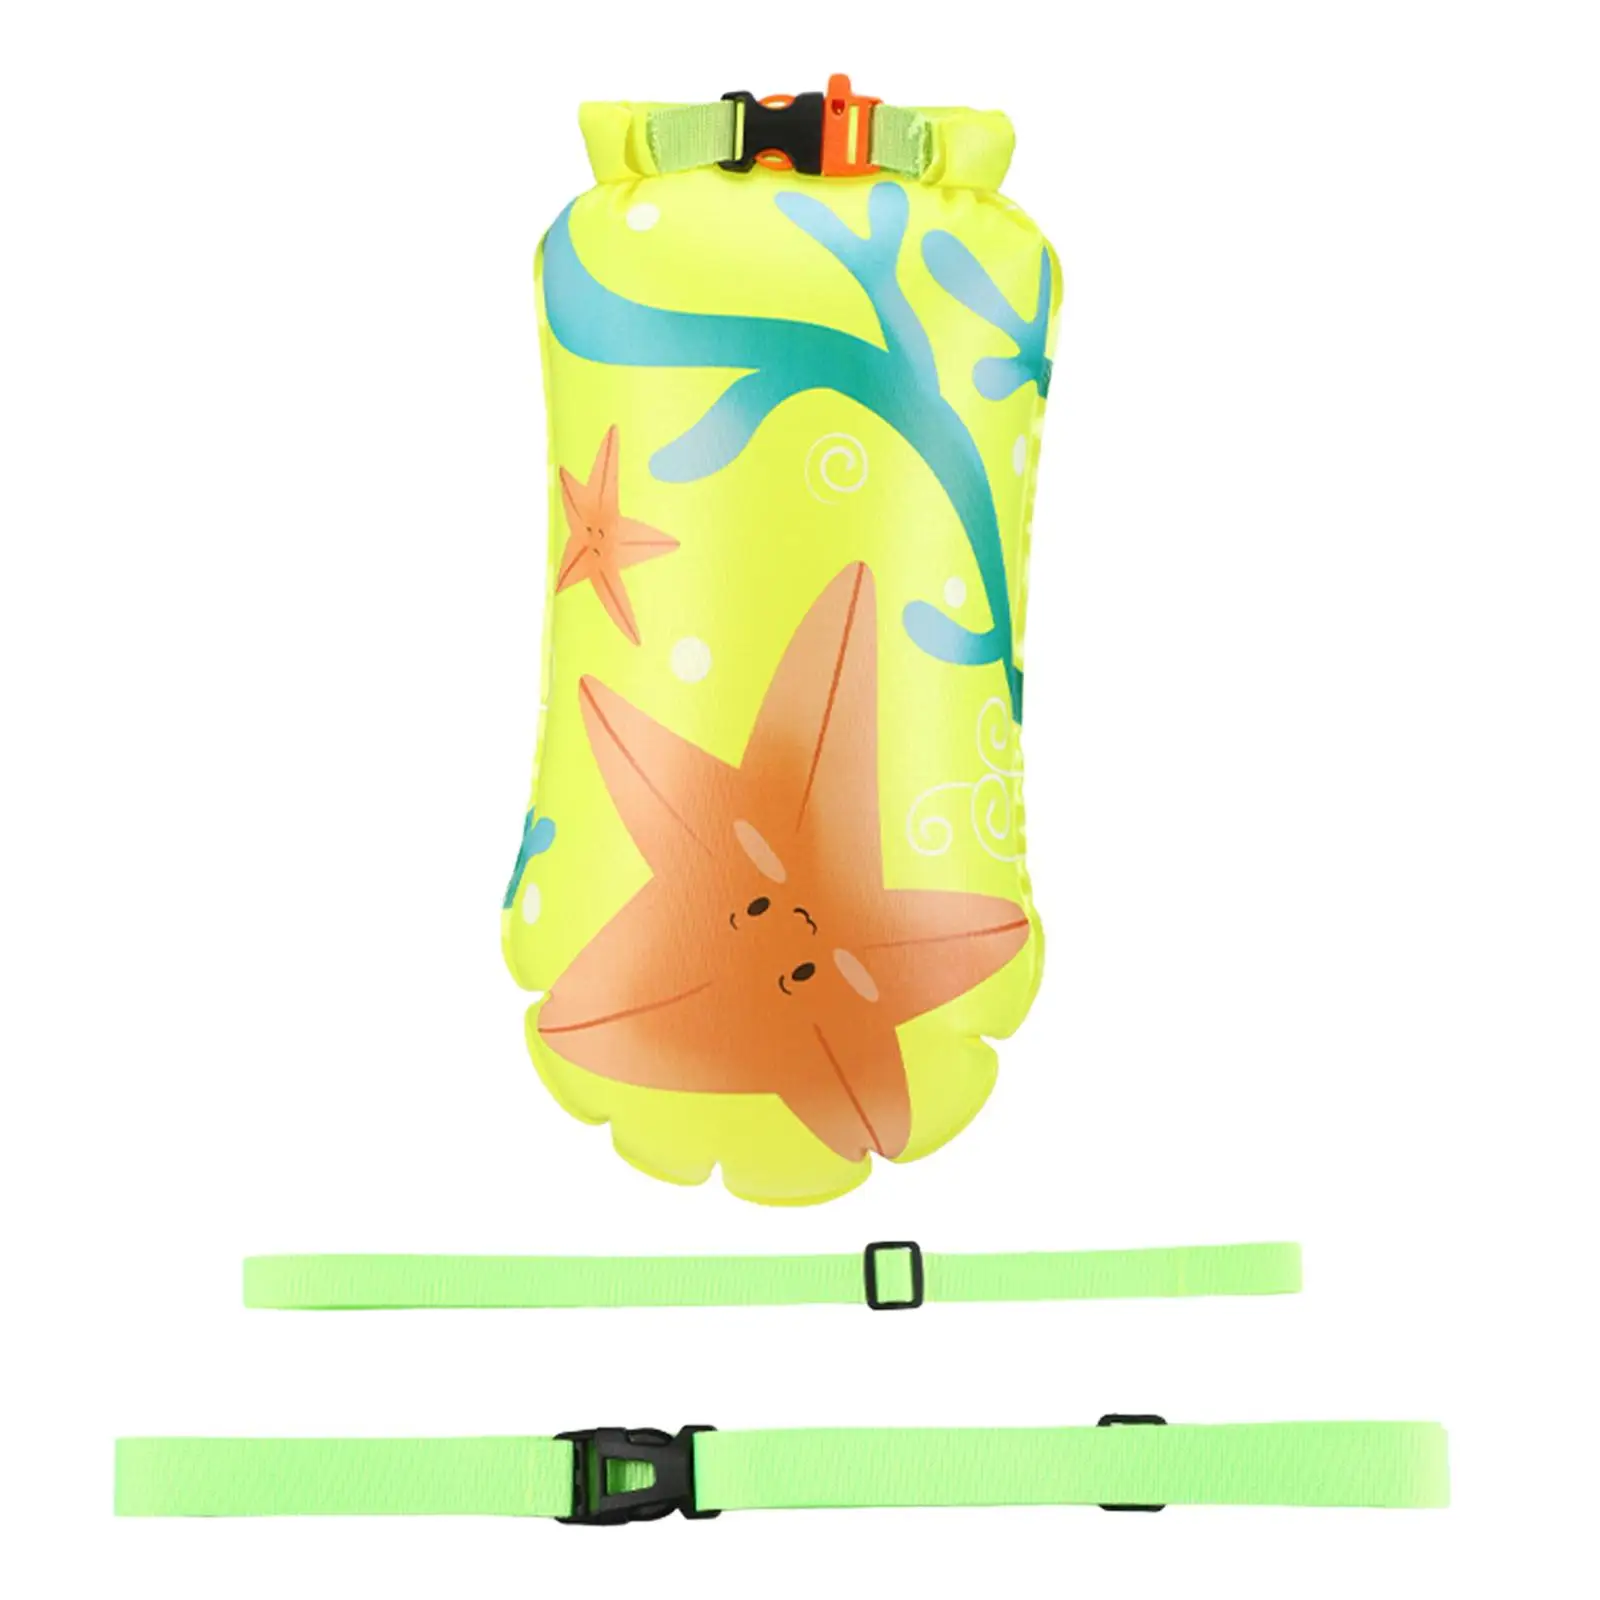 Safety Swim Buoy Waterproof Bag Swimming Buoy Tow Float High Visible Bag for Swimming Outdoor Kayak Water Sports Boating